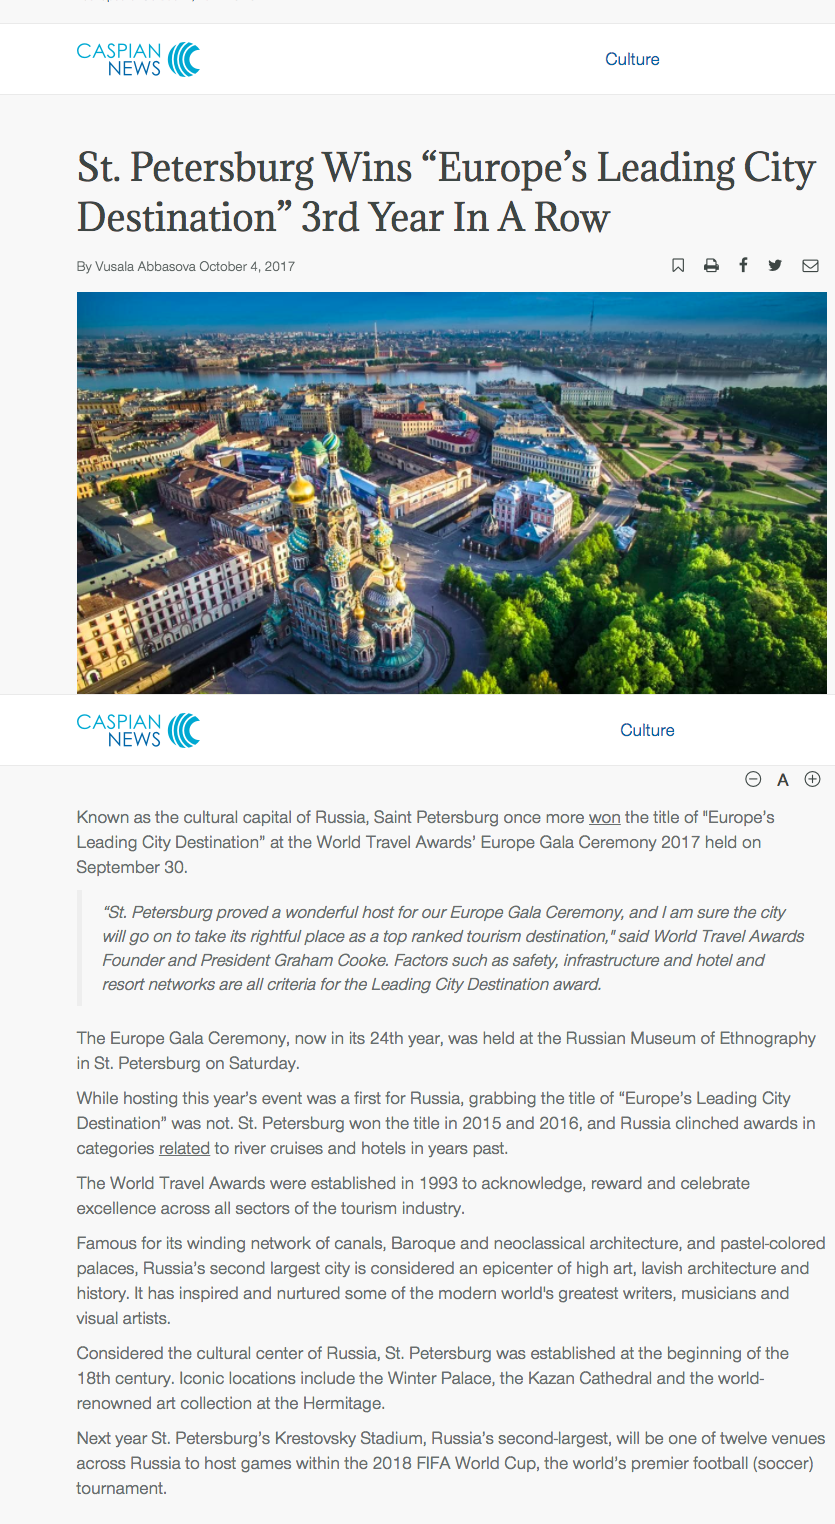 St. Petersburg Wins “Europe’s Leading City Destination” 3rd Year In A Row